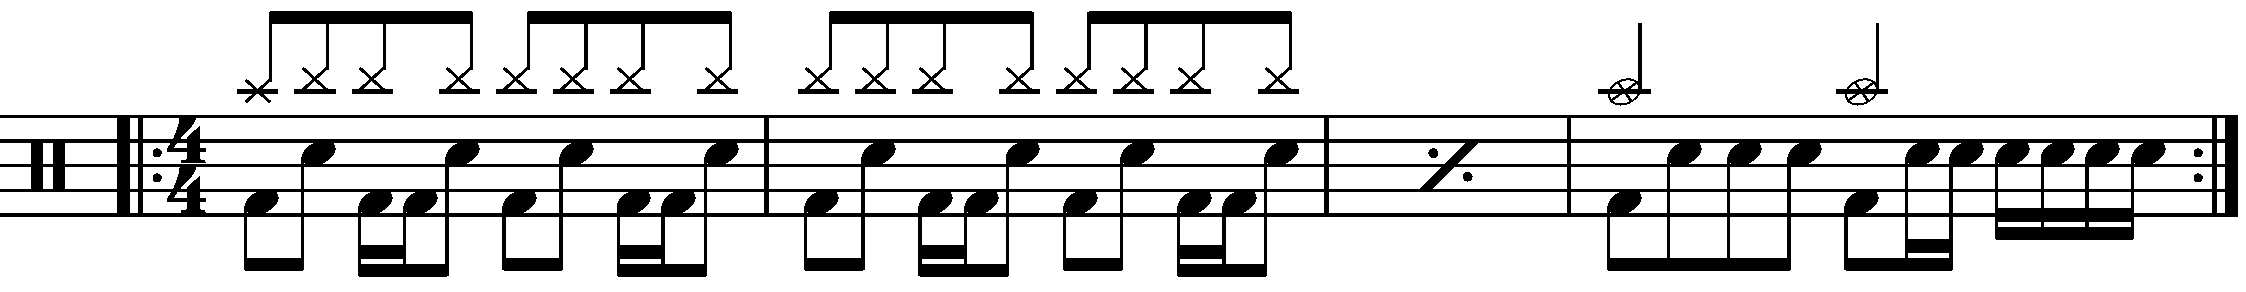 A four bar phrase using a double time groove.